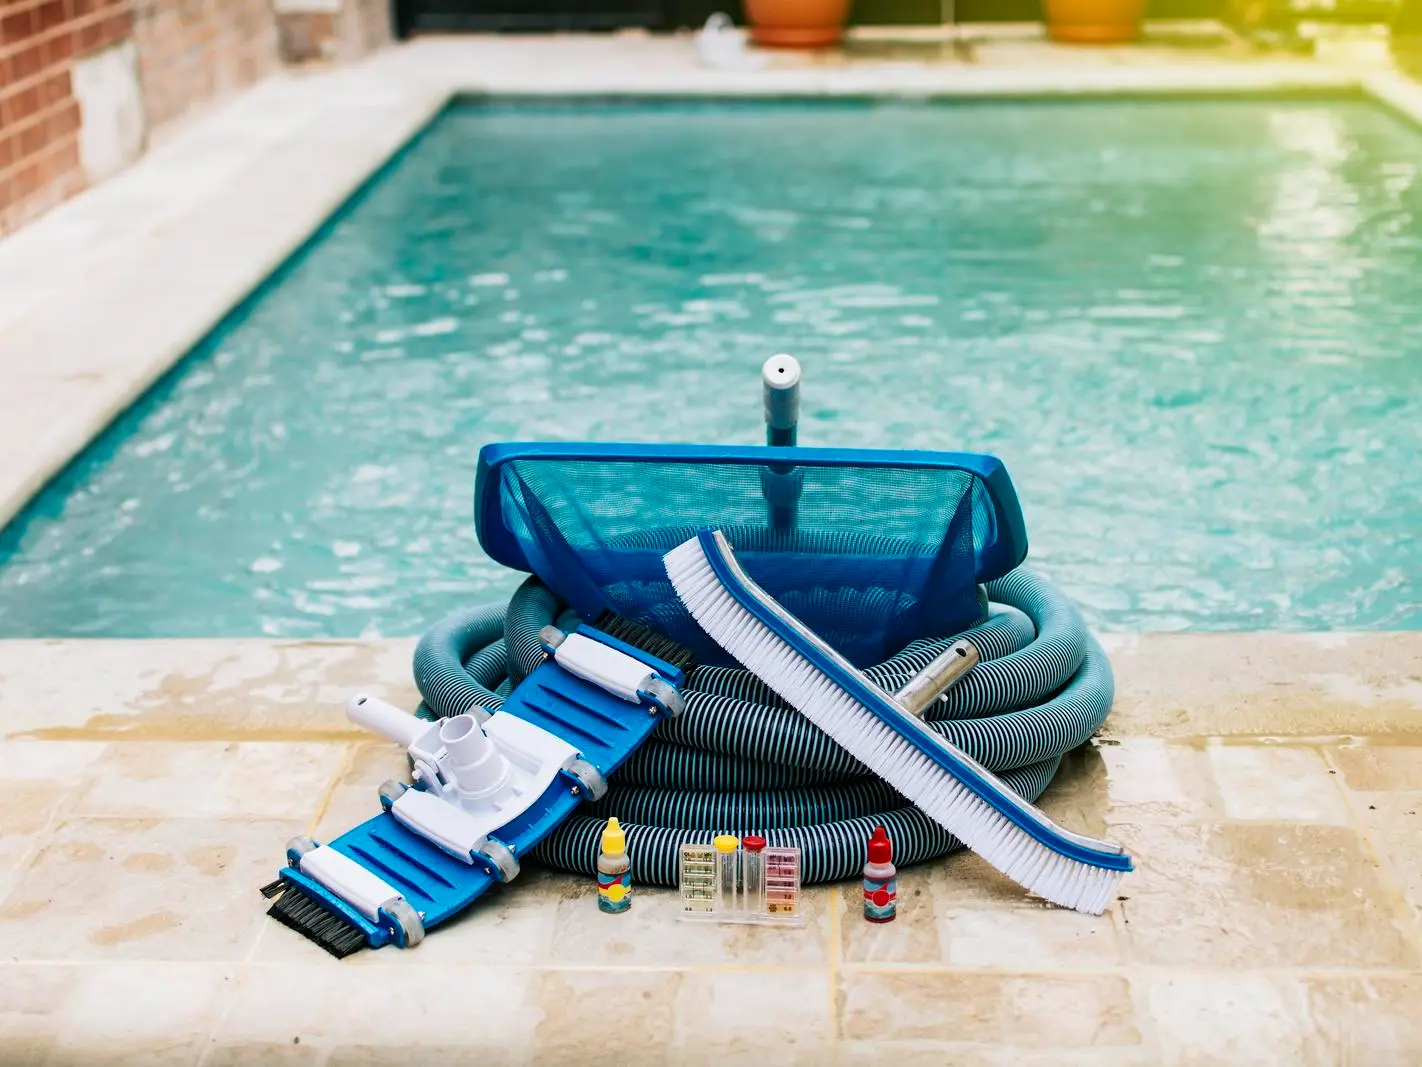 Pool maintenance equipment and accessories: brushes, nets, vacuum heads, chemicals, and test kits.